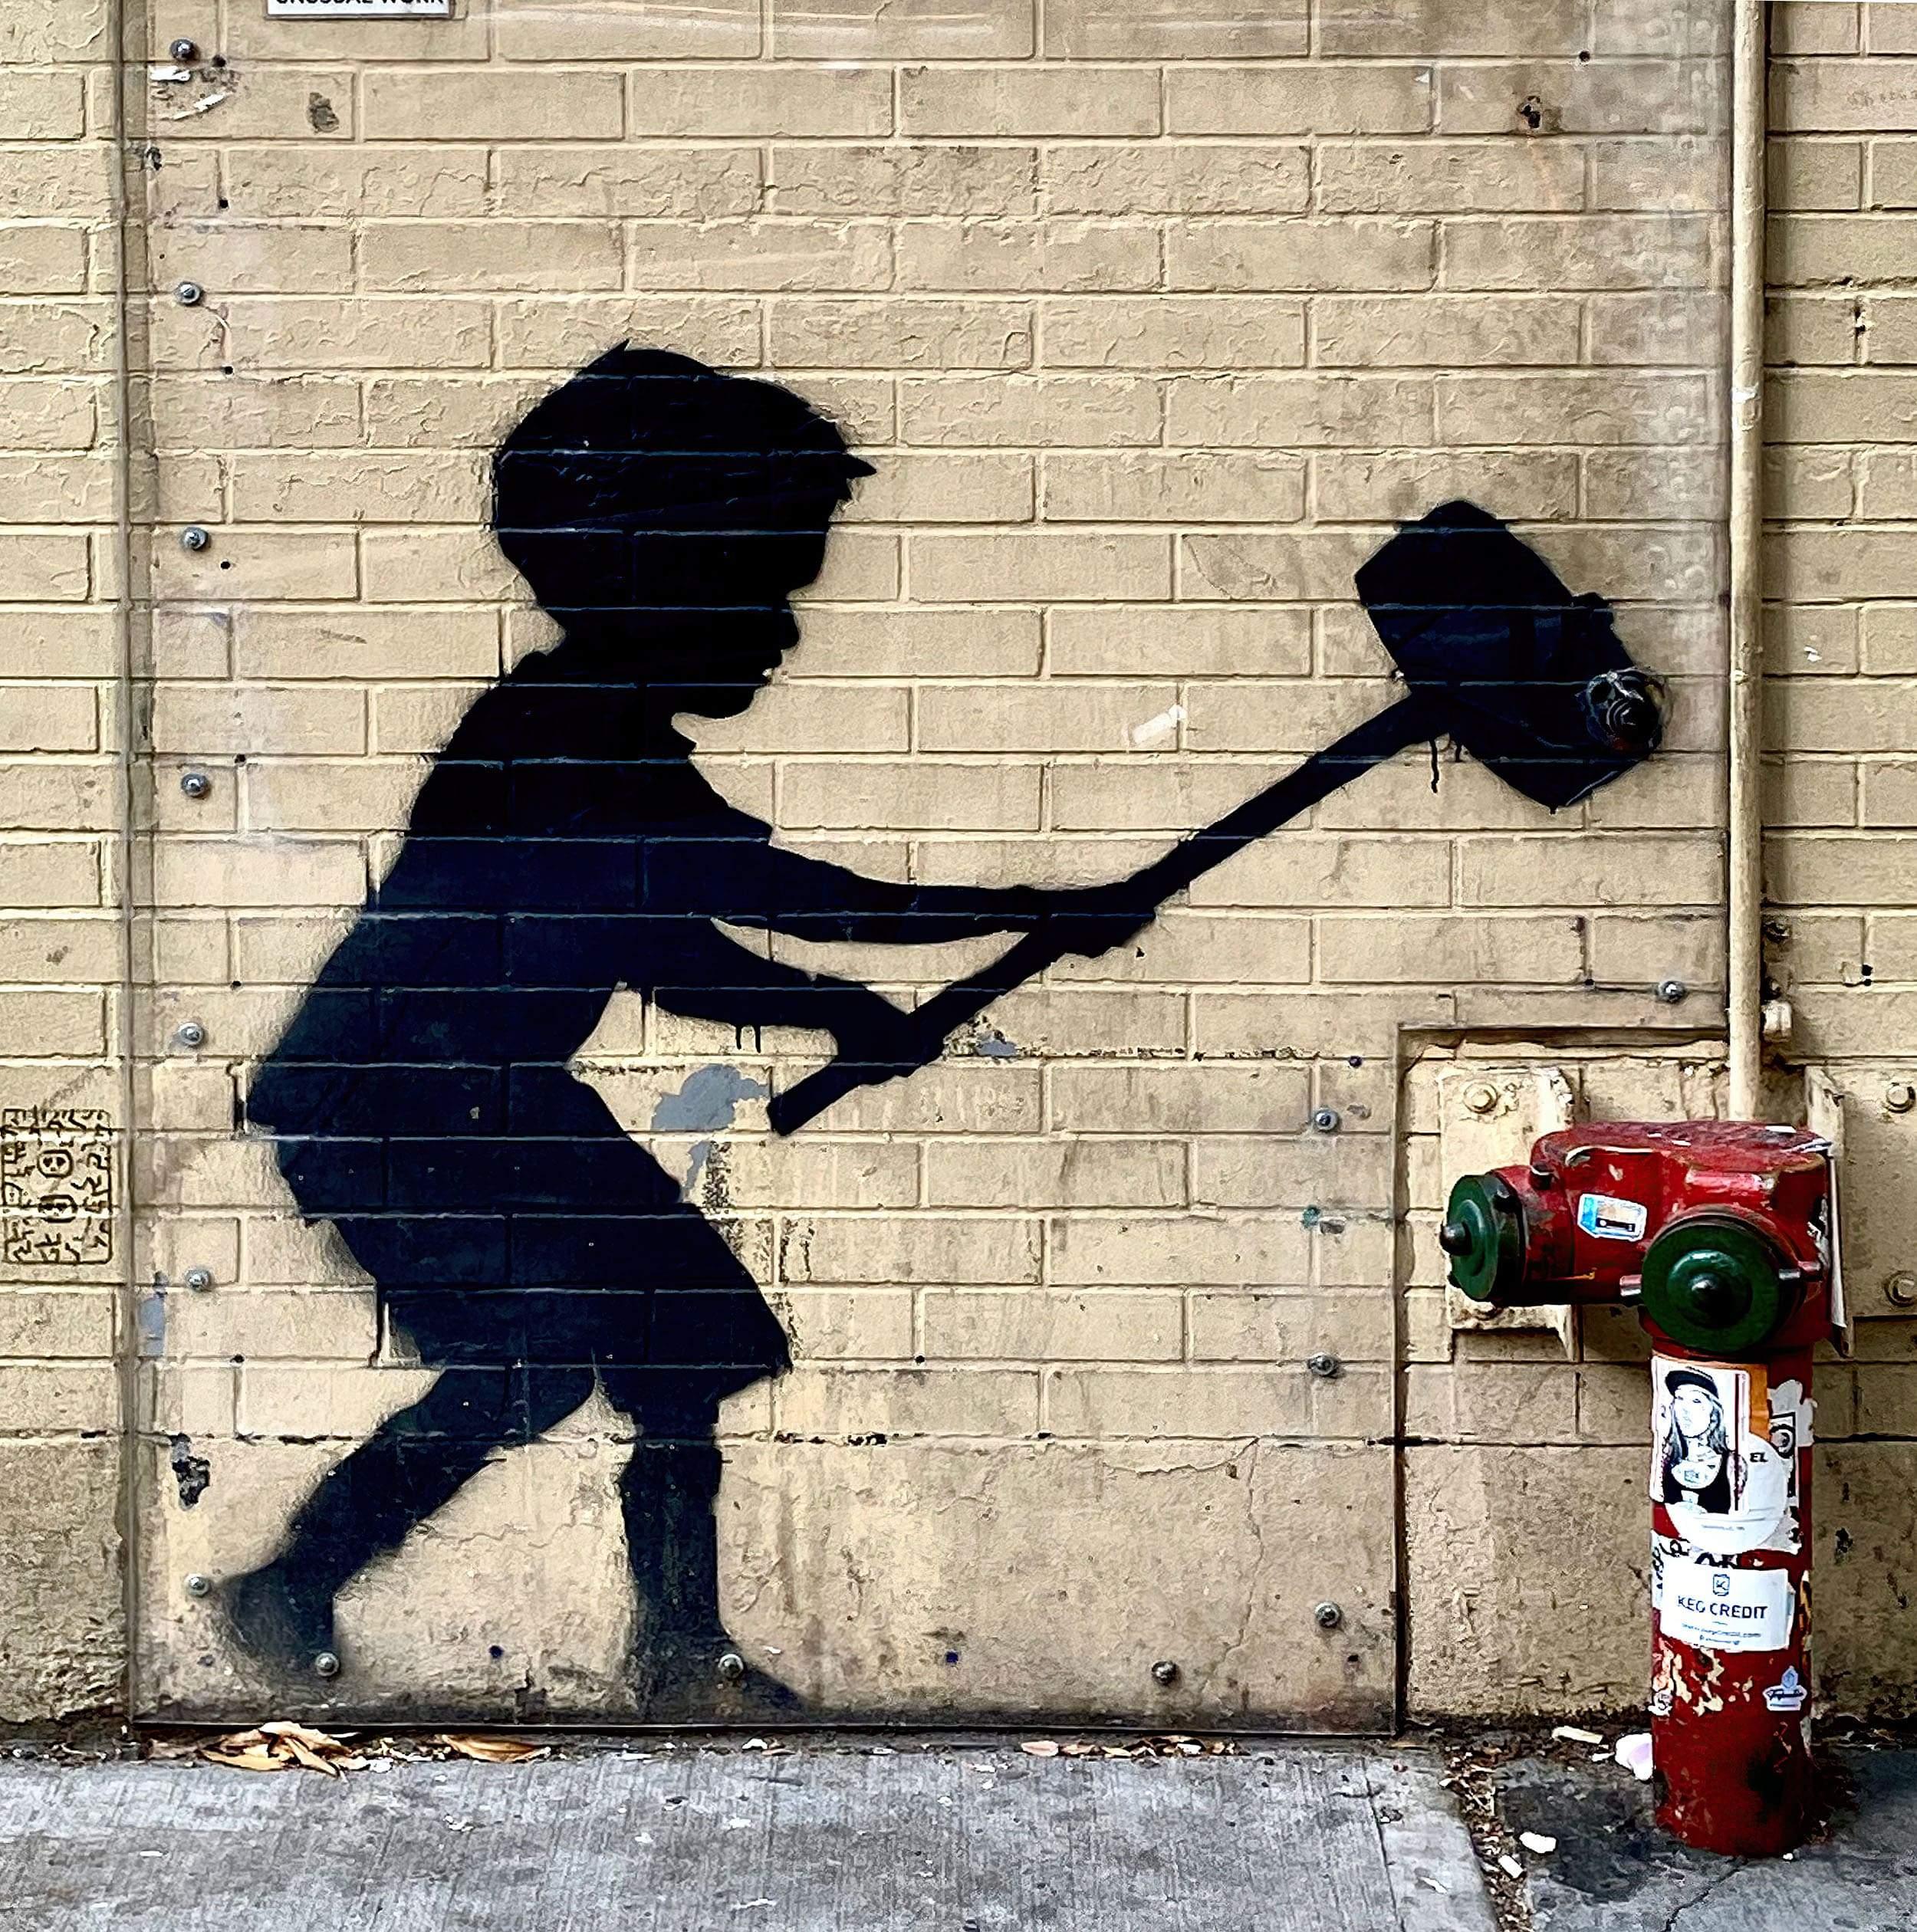 Banksy NYC Child with Hammer: Upper West Side NYC.